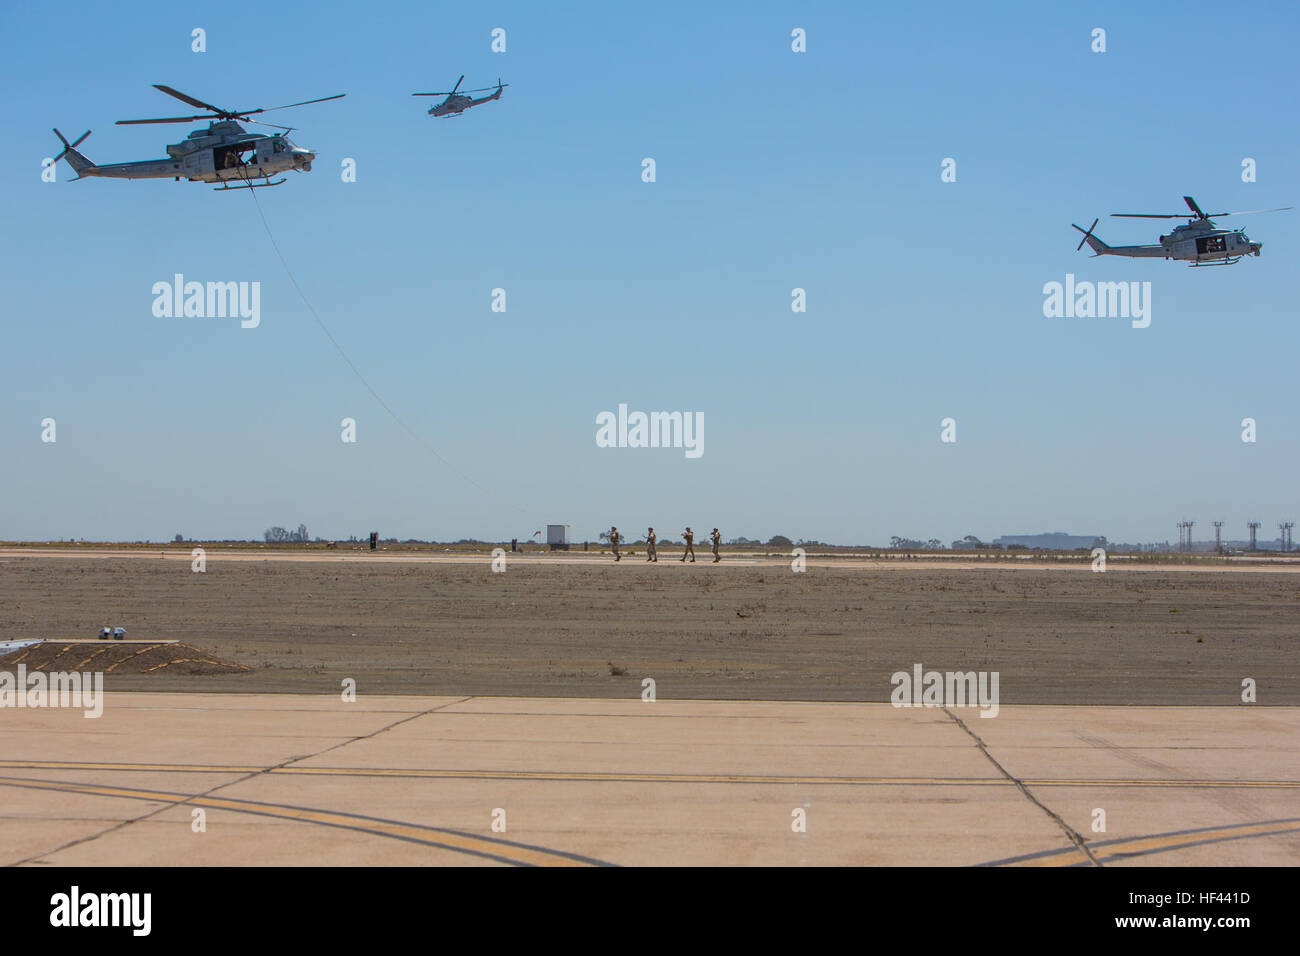 U.S. Marines with 1st Marine Division, conduct fast roping drills from UH-1Y Venom helicopter’s during the Marine Air Ground Task Force demonstration at the 2016 Marine Corps Air Station (MCAS) Miramar Air Show at MCAS Miramar, Calif., Sept. 23, 2016. The MCAS Miramar Air Show honors 100 years of the Marine Corps Reserves by showcasing aerial prowess of the Armed Forces and their appreciation of the civilian community’s support to the troops. (U.S. Marine Corps photo By Corporal Jessica Y. Lucio/Released) MCAS Miramar Air Show 160923-M-UX416-071 Stock Photo